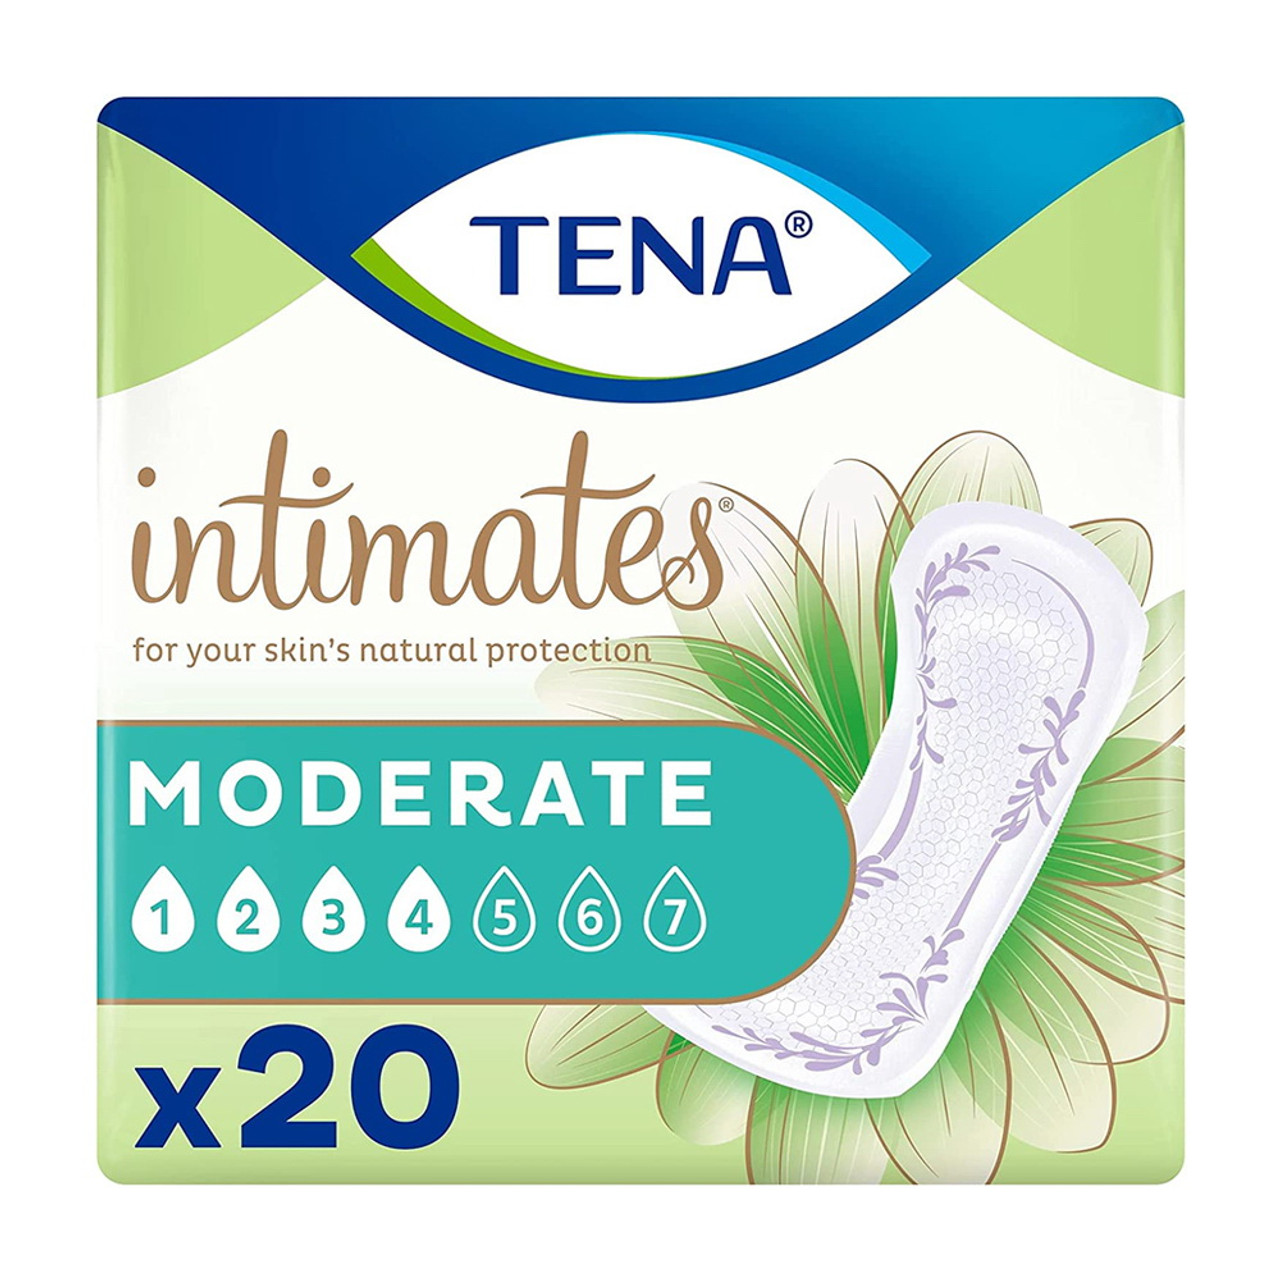 Tena Intimates Extra Coverage Overnight Incontinence Pads For Women, 28 ct  - Pay Less Super Markets